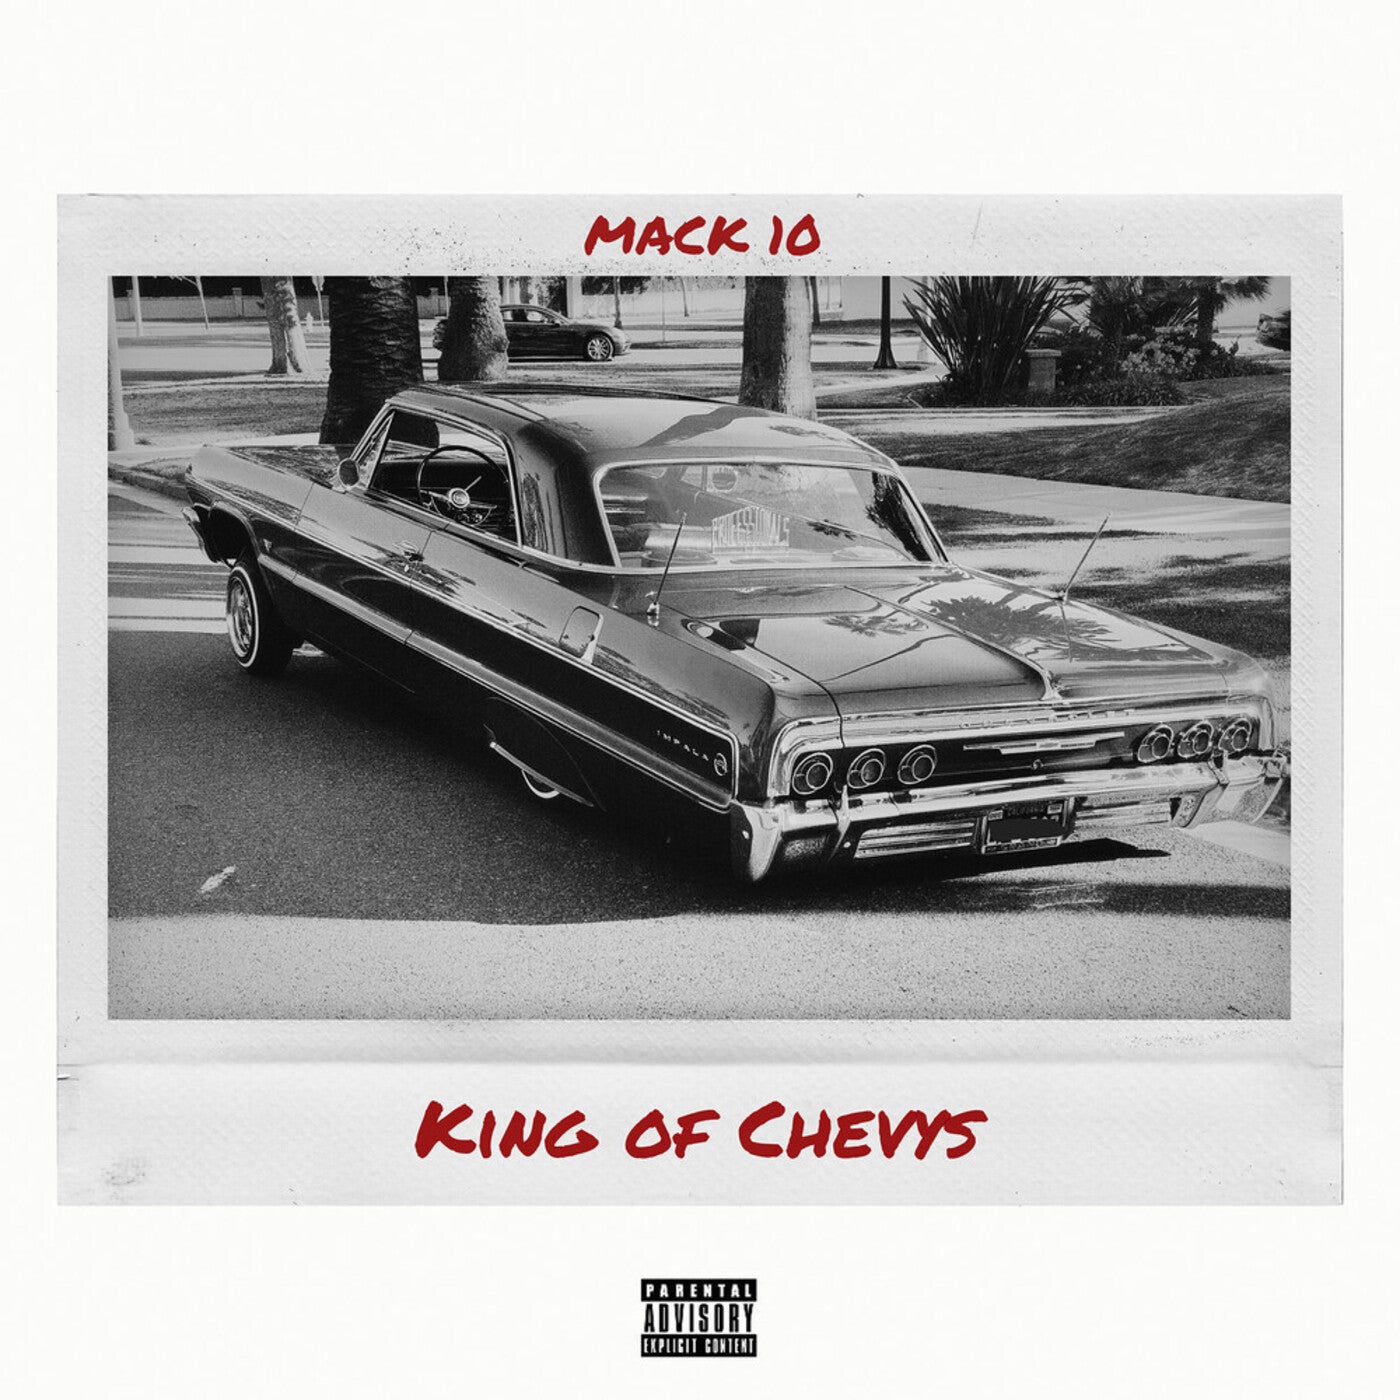 King Of Chevys by Mack 10 and DJ Battlecat on Beatsource